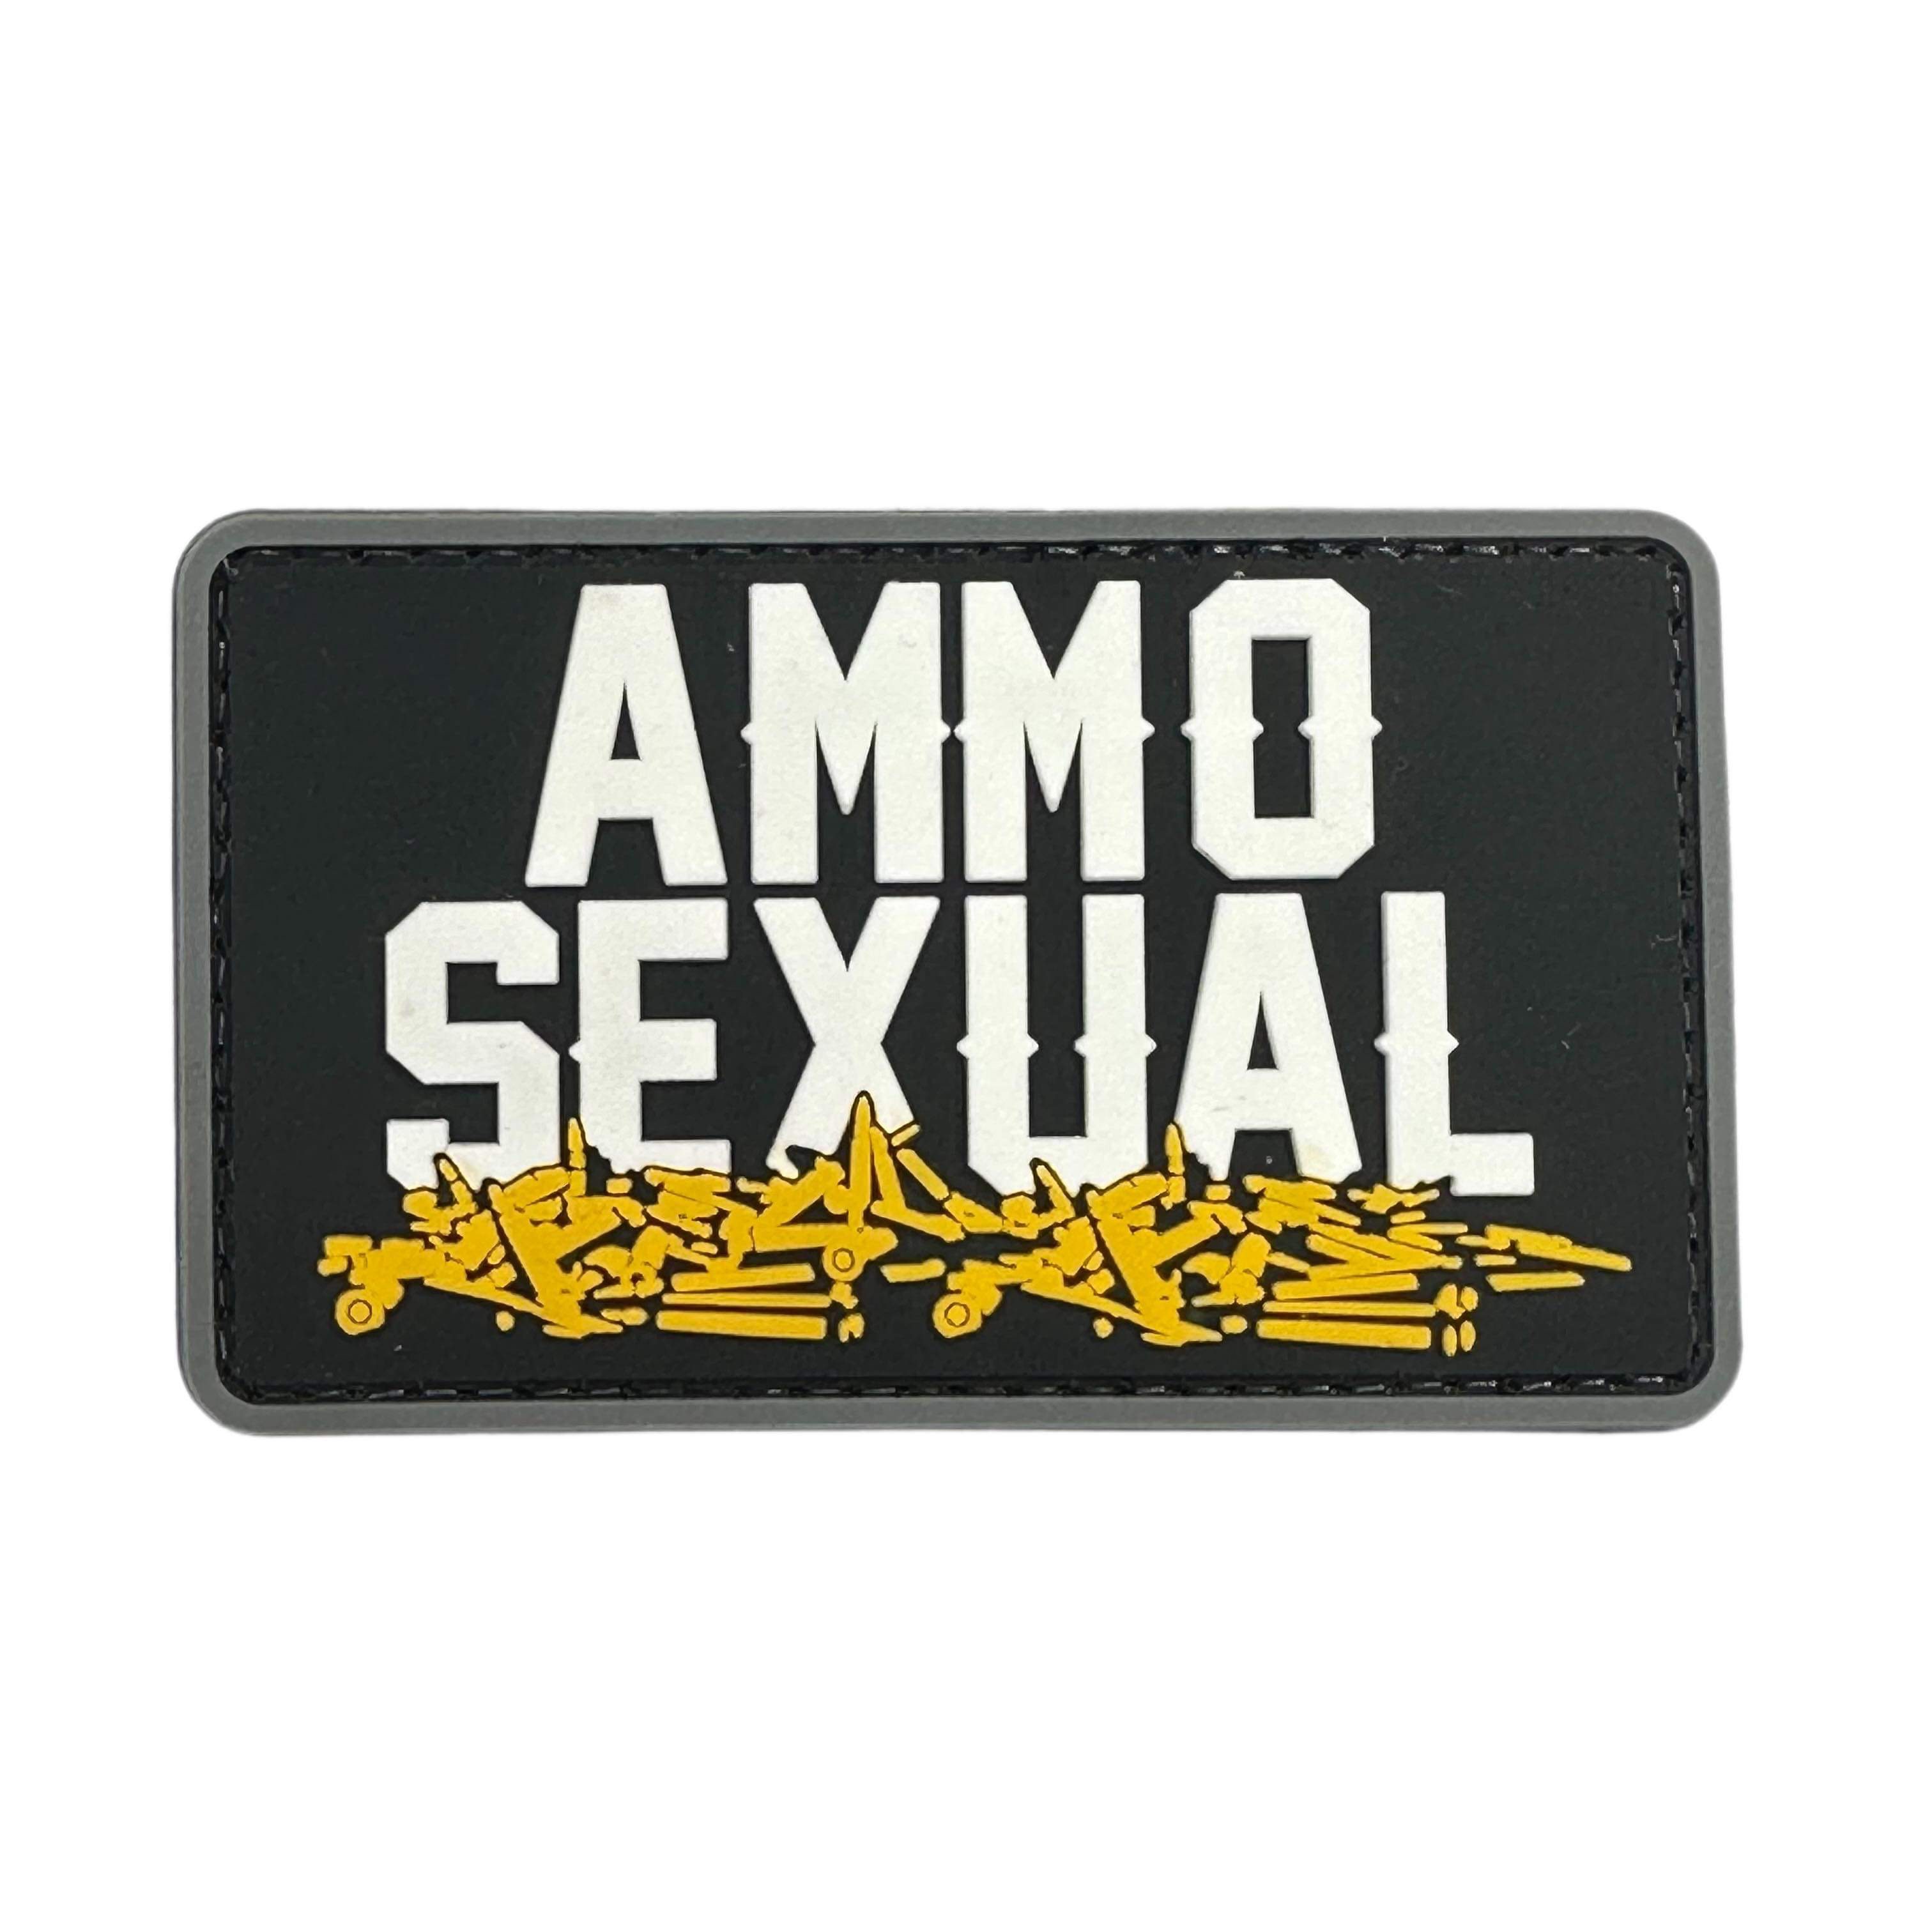 Rubber Patch - Ammo sexual